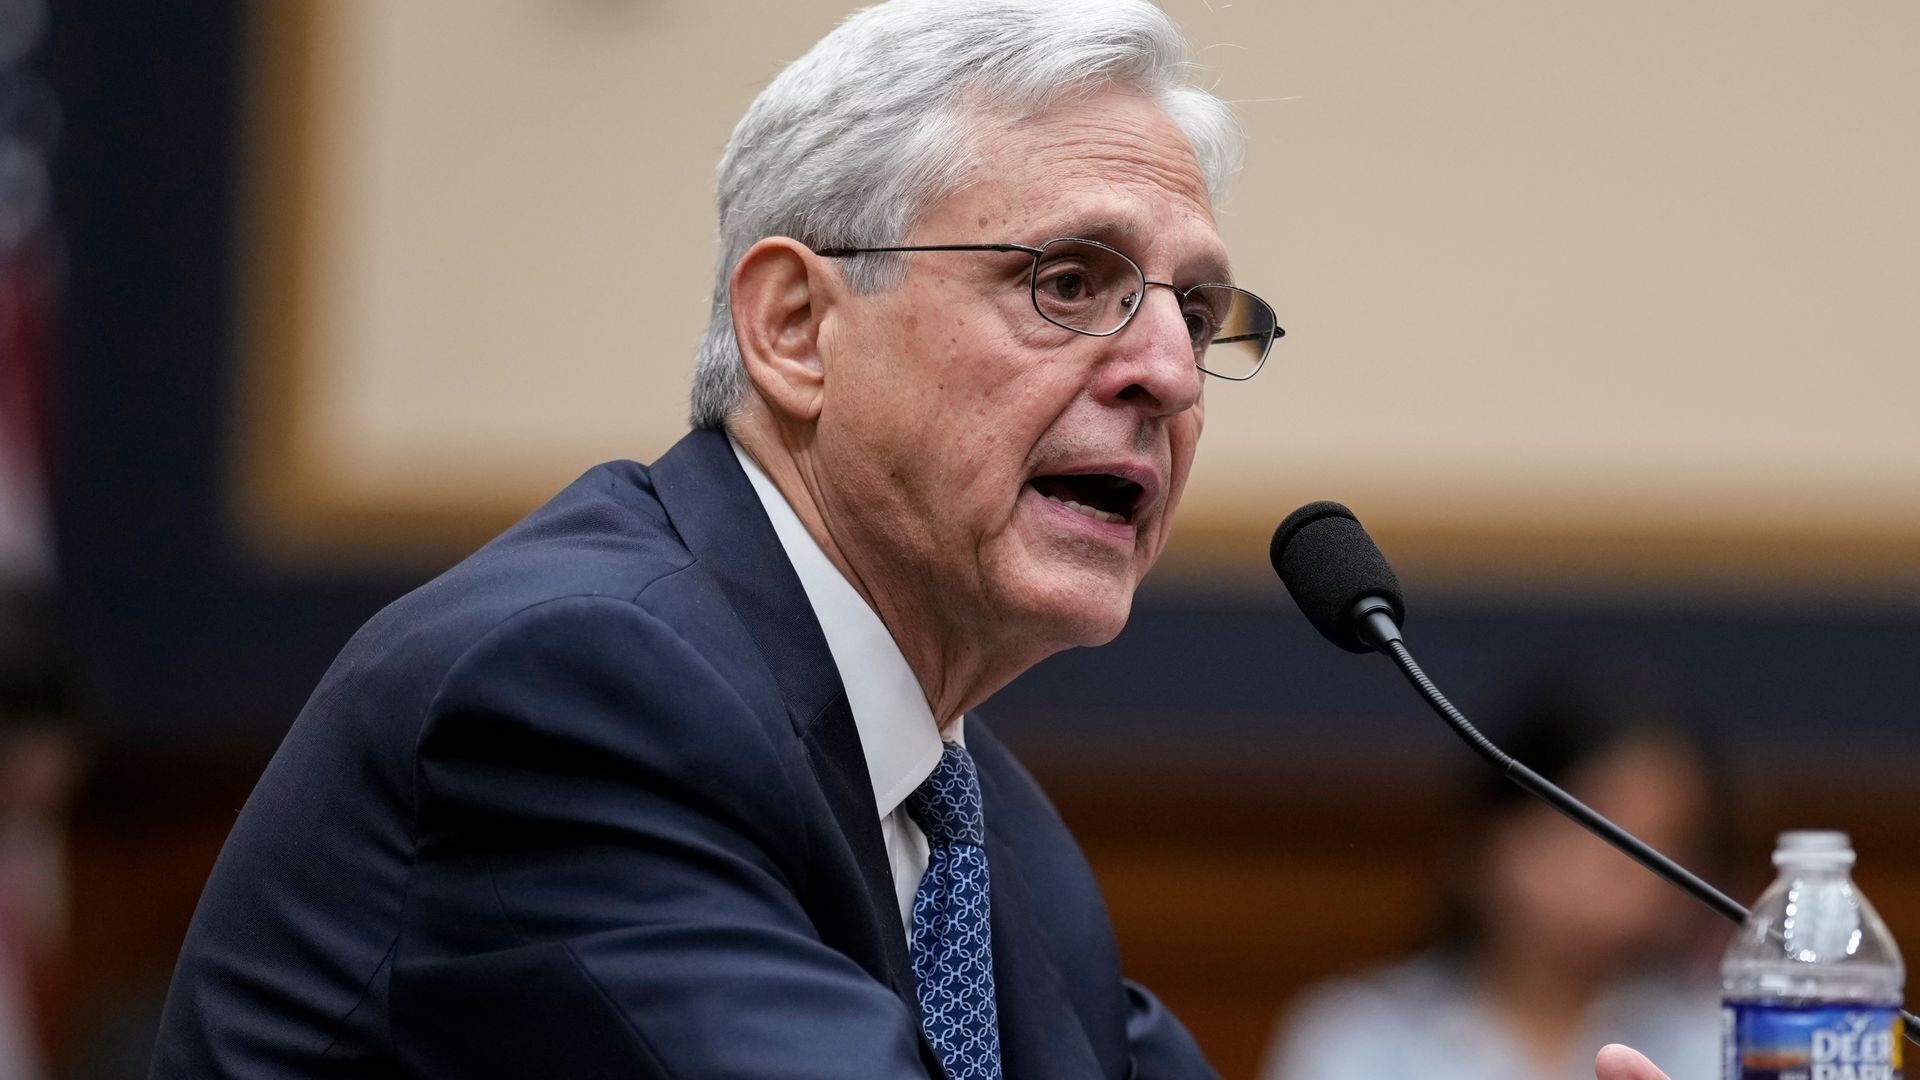 Rep. Anna Paulina Luna (R-Fla.) introduced a resolution to hold Attorney General Merrick Garland in “inherent contempt” of Congress, proposing a ,000 daily fine for not releasing audio of President Biden’s interview about classified documents.